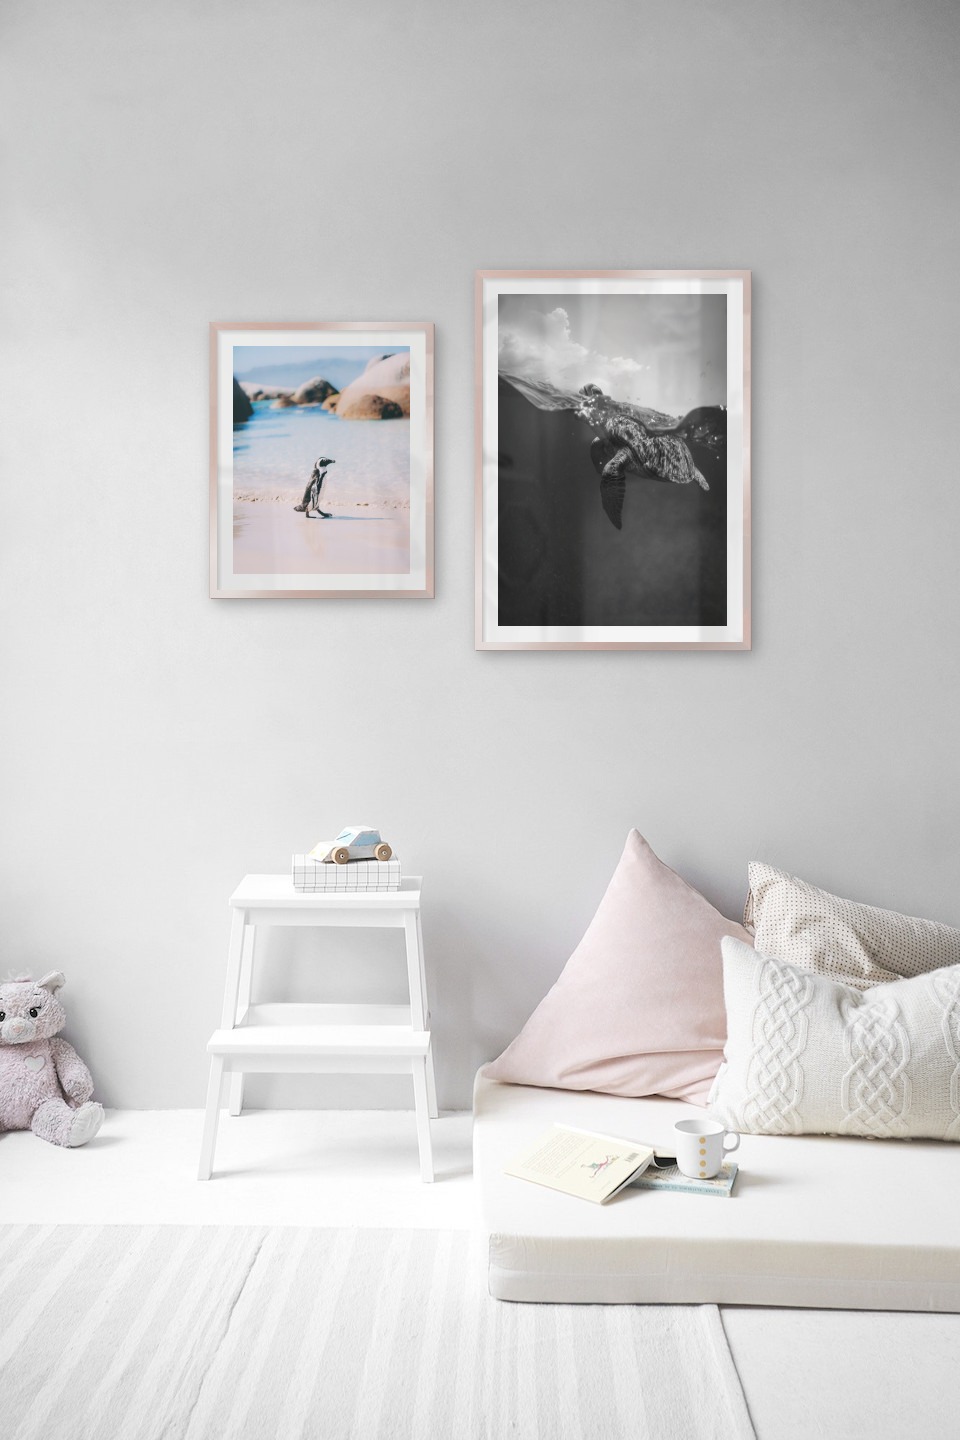 Gallery wall with picture frames in copper in sizes 40x50 and 50x70 with prints "Penguin on the beach" and "Turtle"